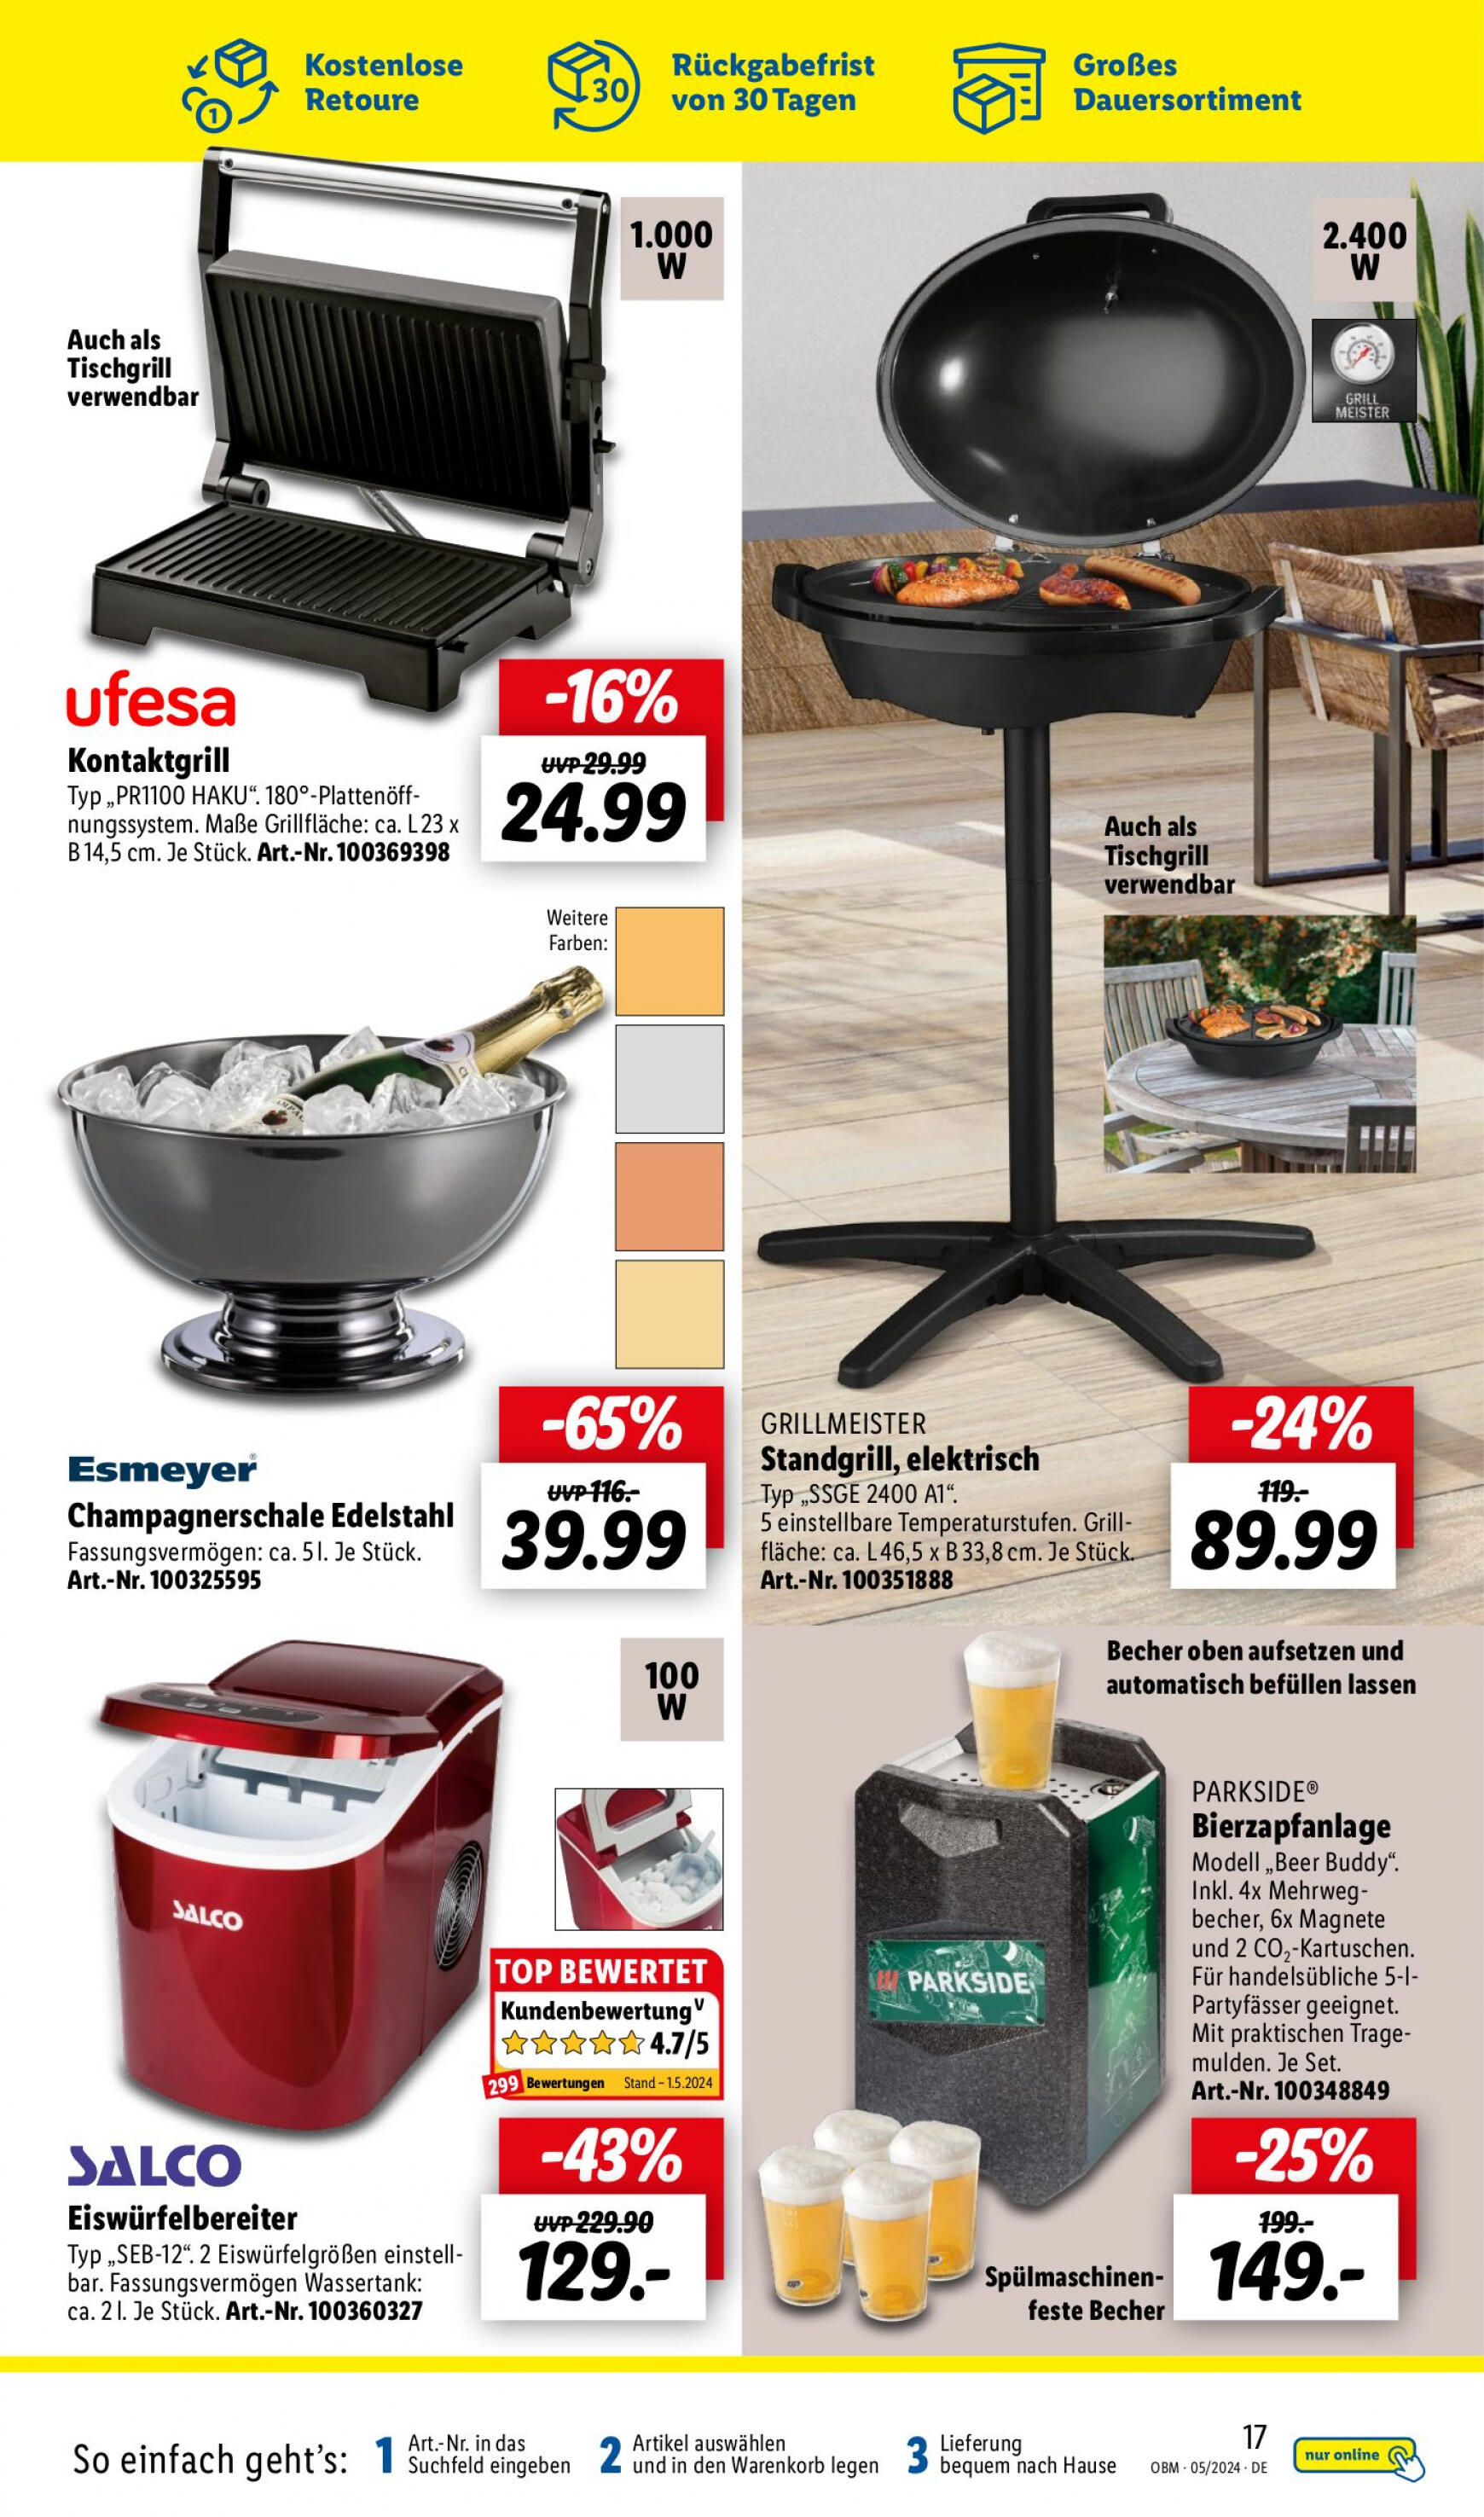 lidl - Flyer Lidl - Aktuelle Onlineshop-Highlights aktuell 01.05. - 31.05. - page: 17